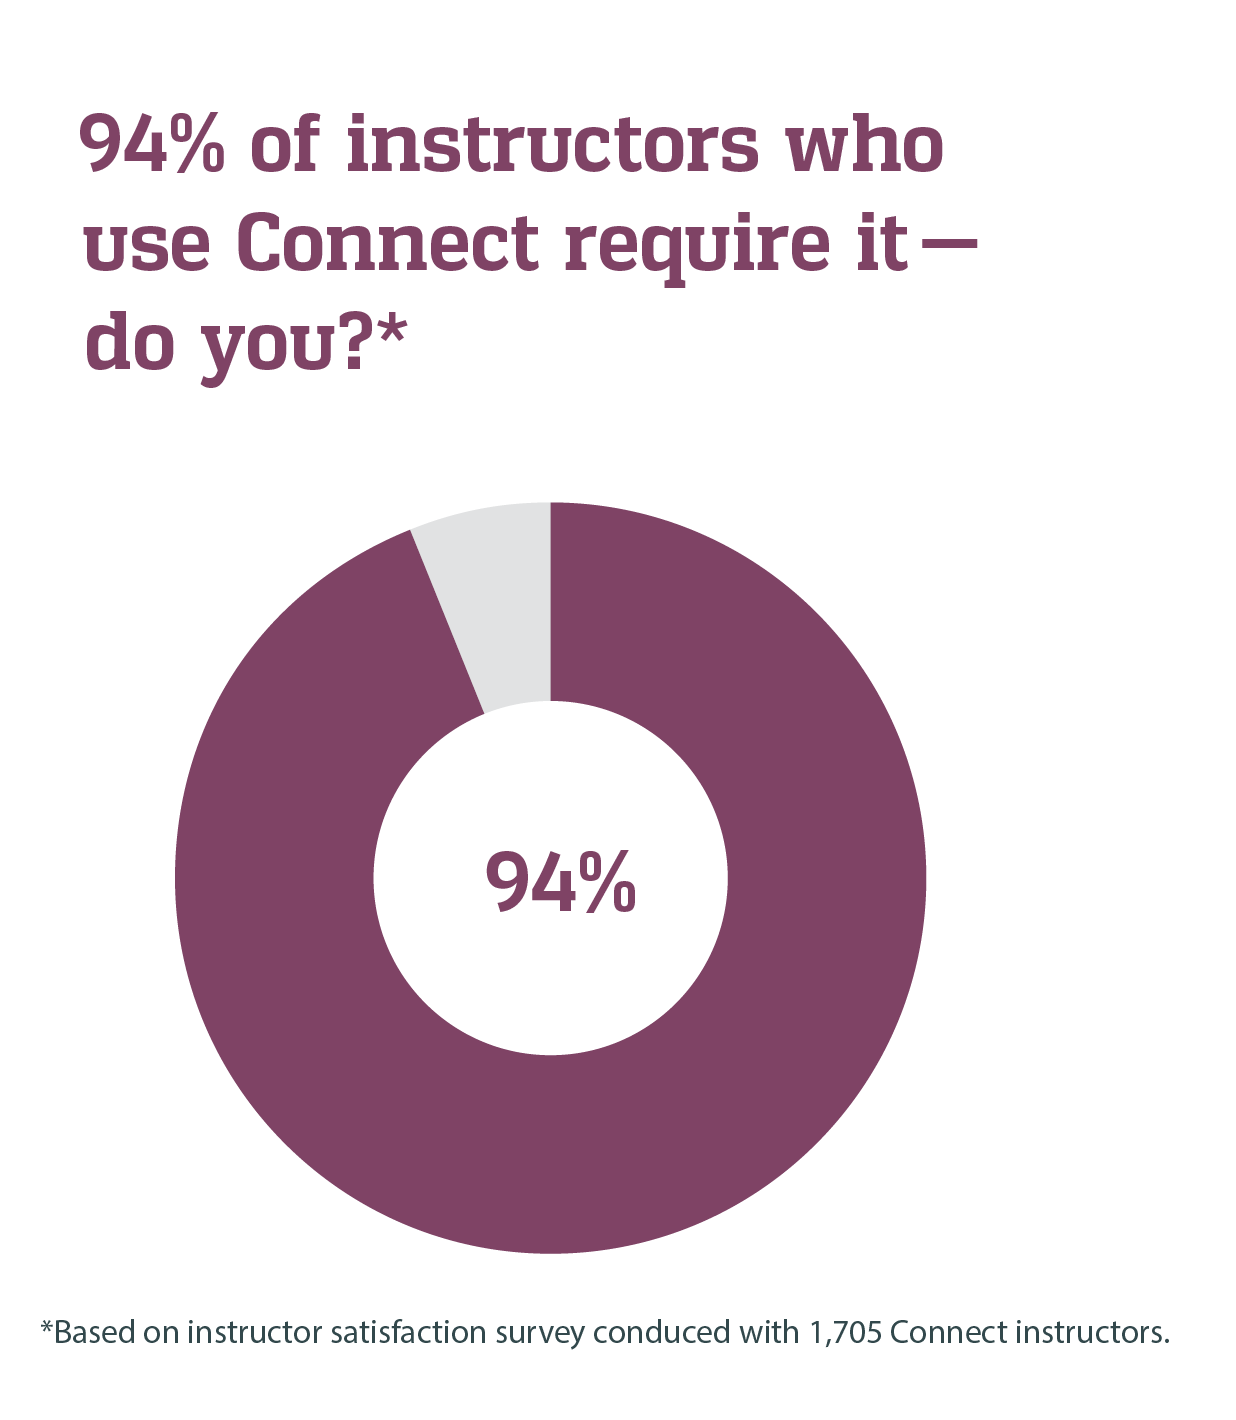 88% of instructors who use connect require it.